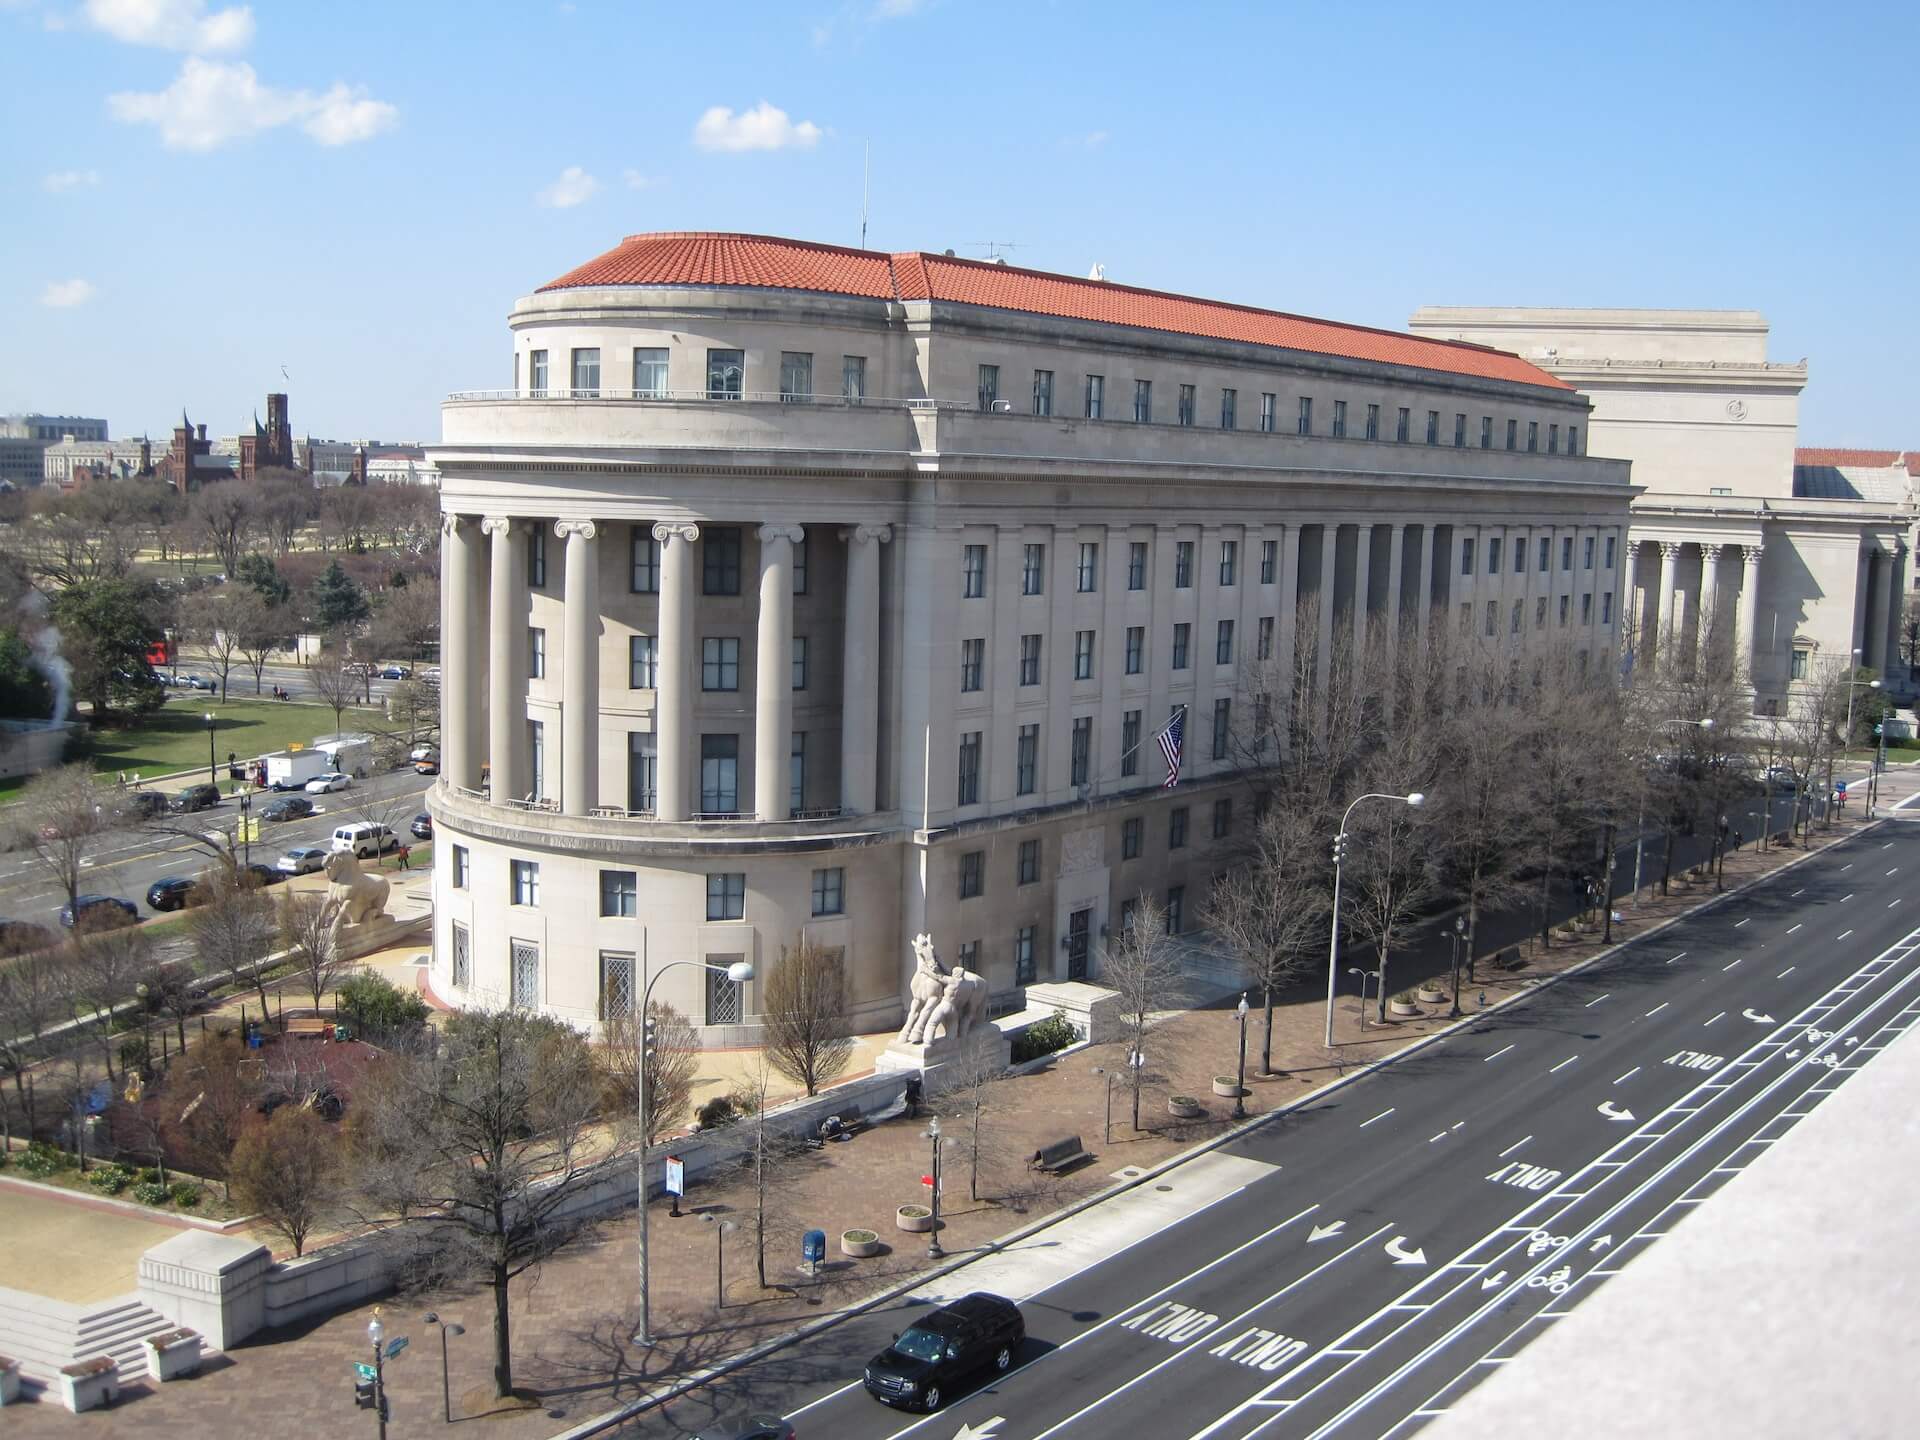 The Federal Trade Commission Building